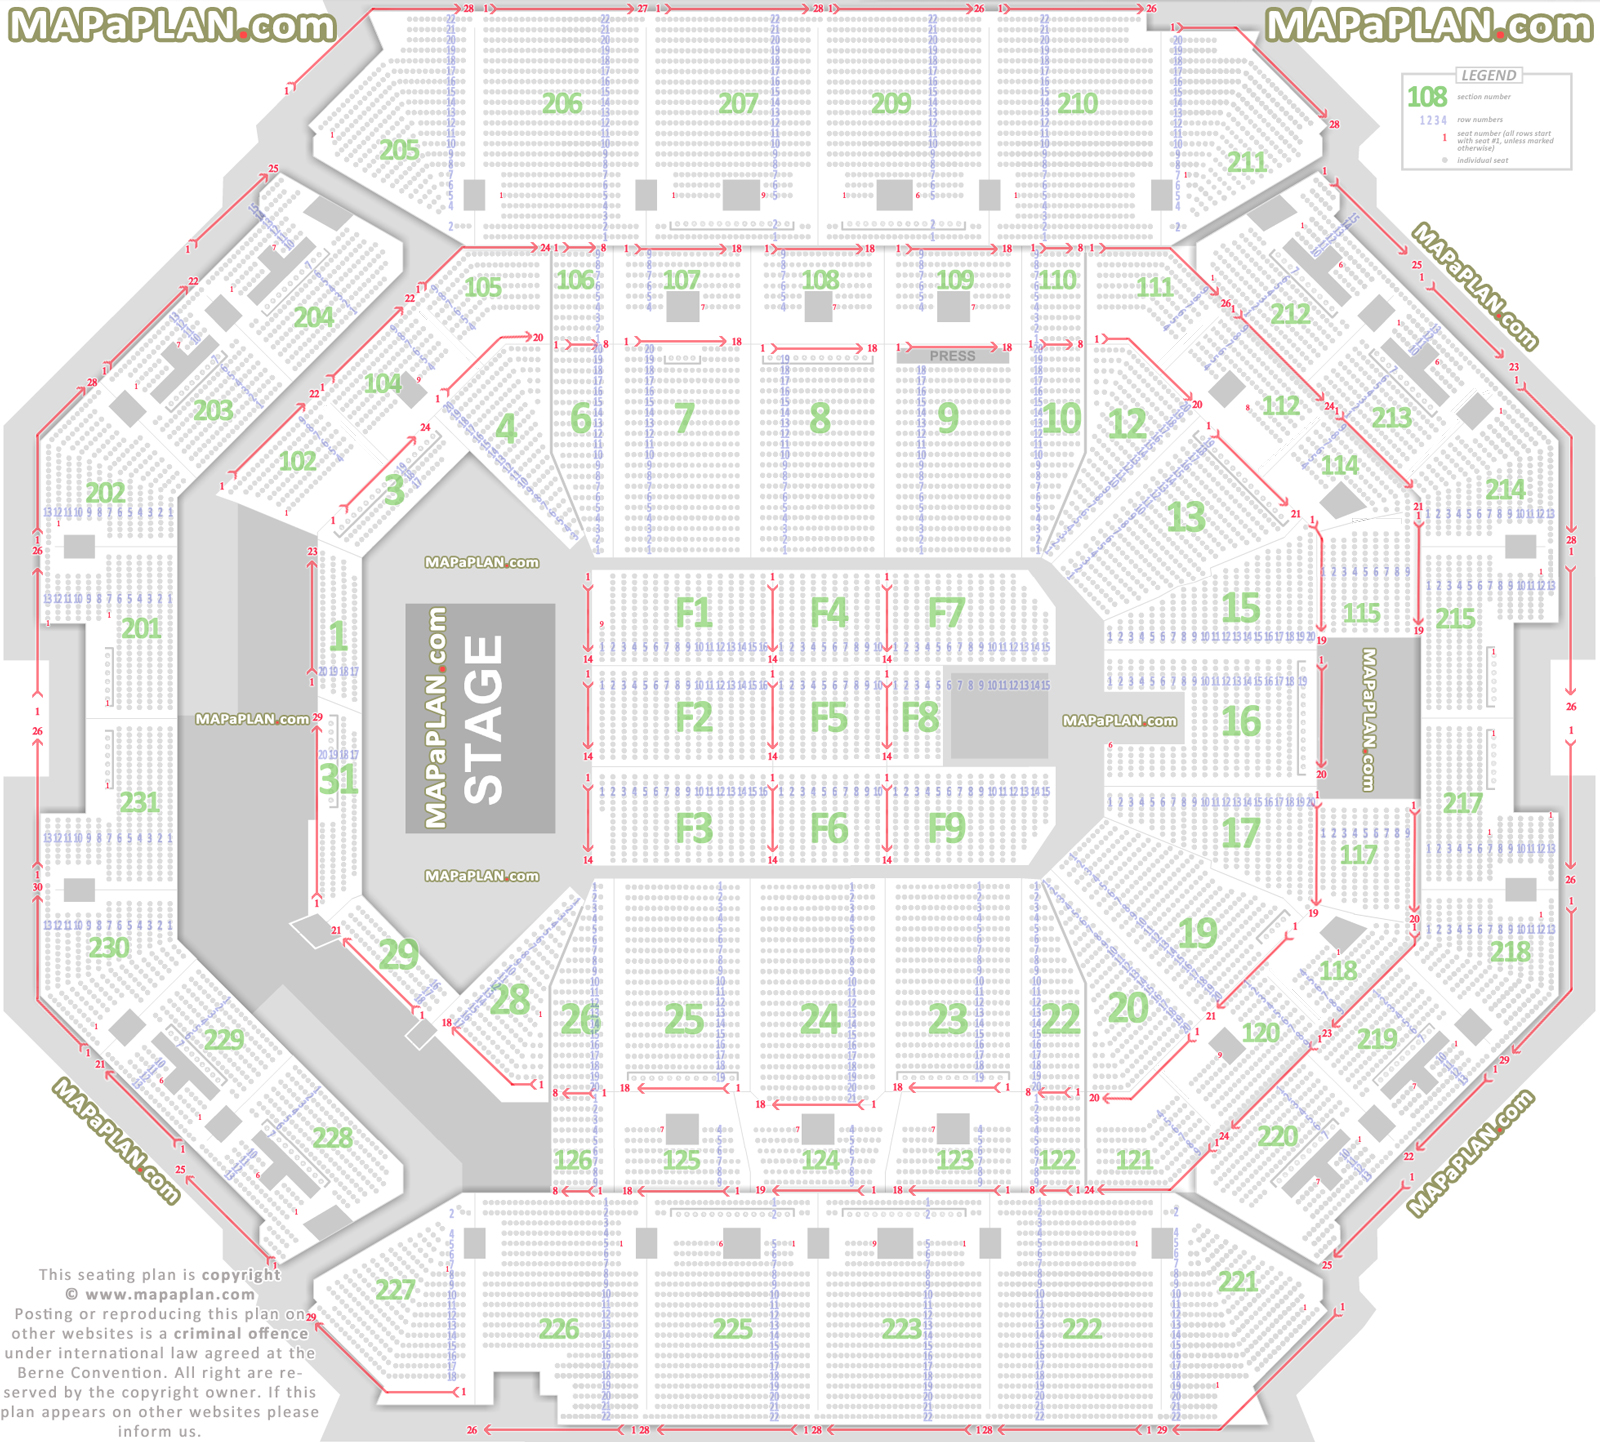 Square Garden Theater Seating Chart With Seat Numbers